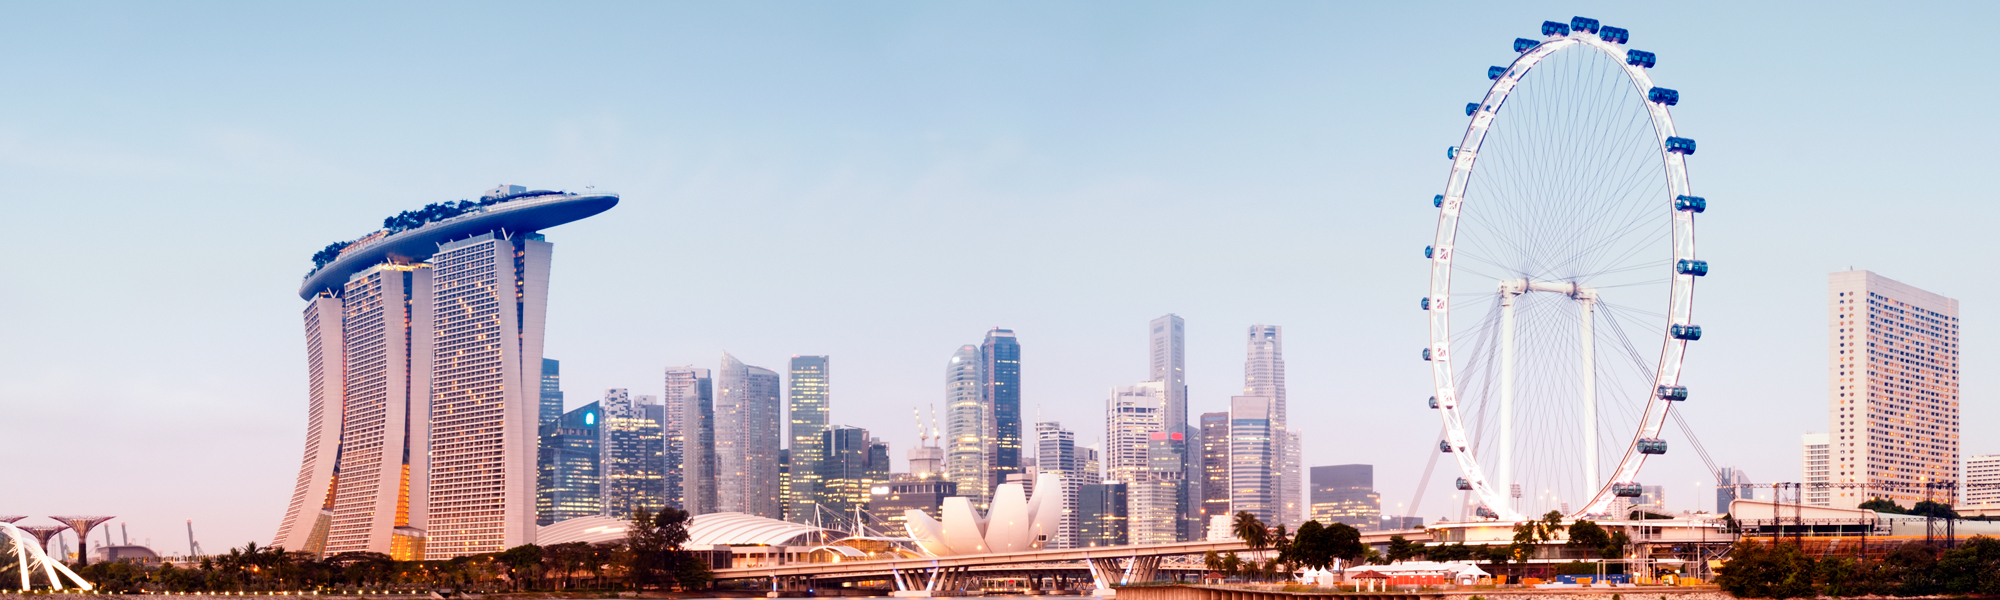 Private Banking: Interconnected - Singapore Global Hub